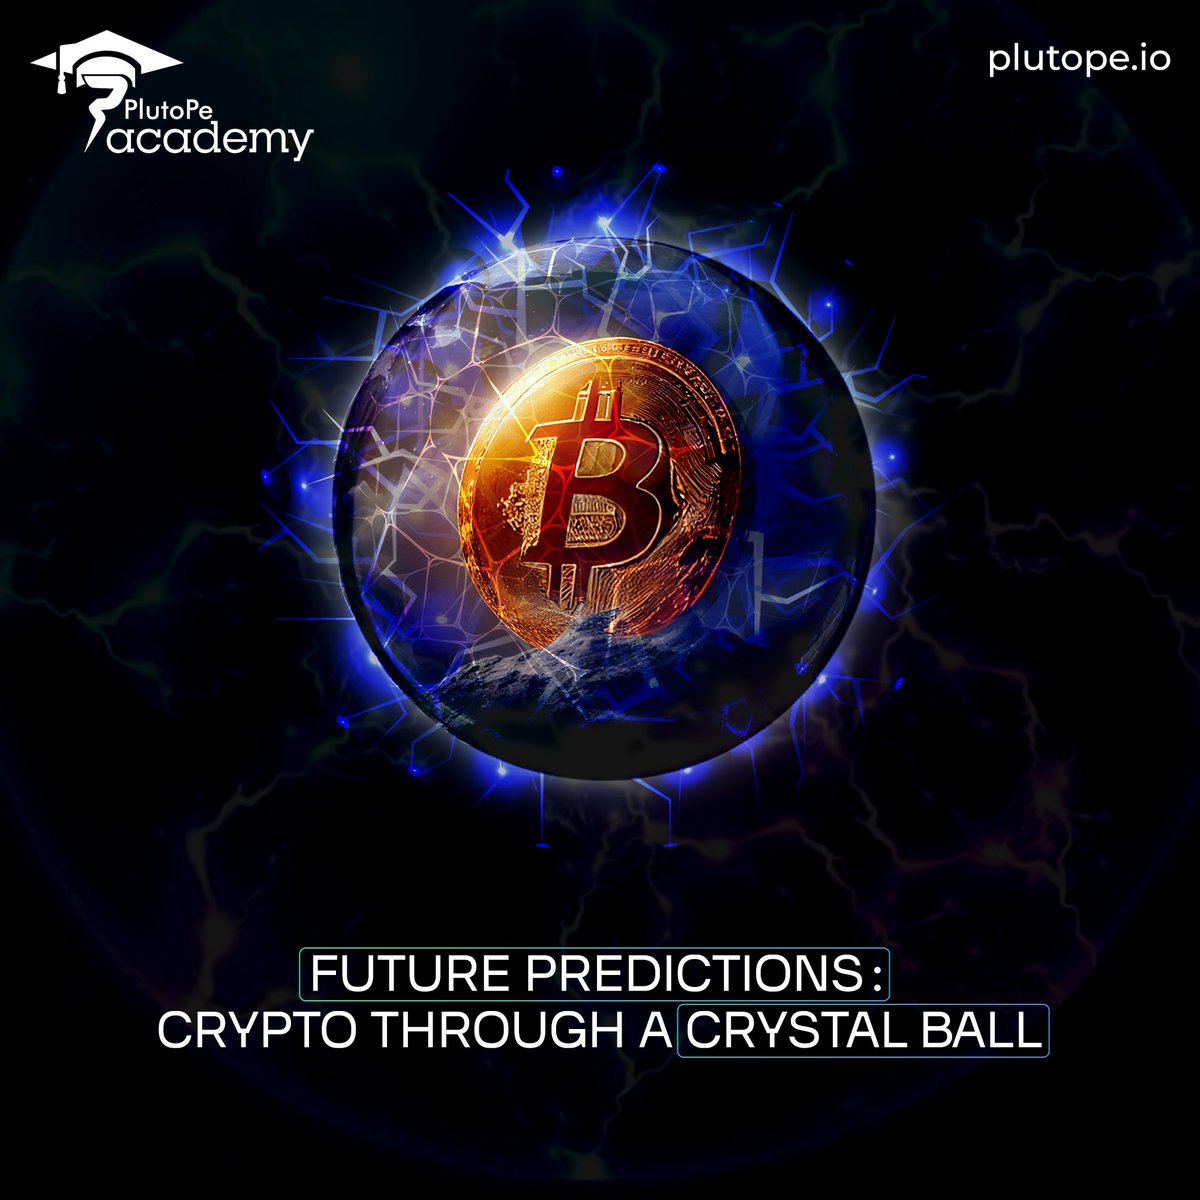 Crystal Ball Time: Will 'Magic Money' Rule the Future? 🎢 Remember GPay & Paytm being new? Now imagine using 'magic internet money' for everything! That's Future Crypto: 🤔Think: Using 'magic money' might be as easy as GPay! Imagine buying things online or even... 🗳️Voting